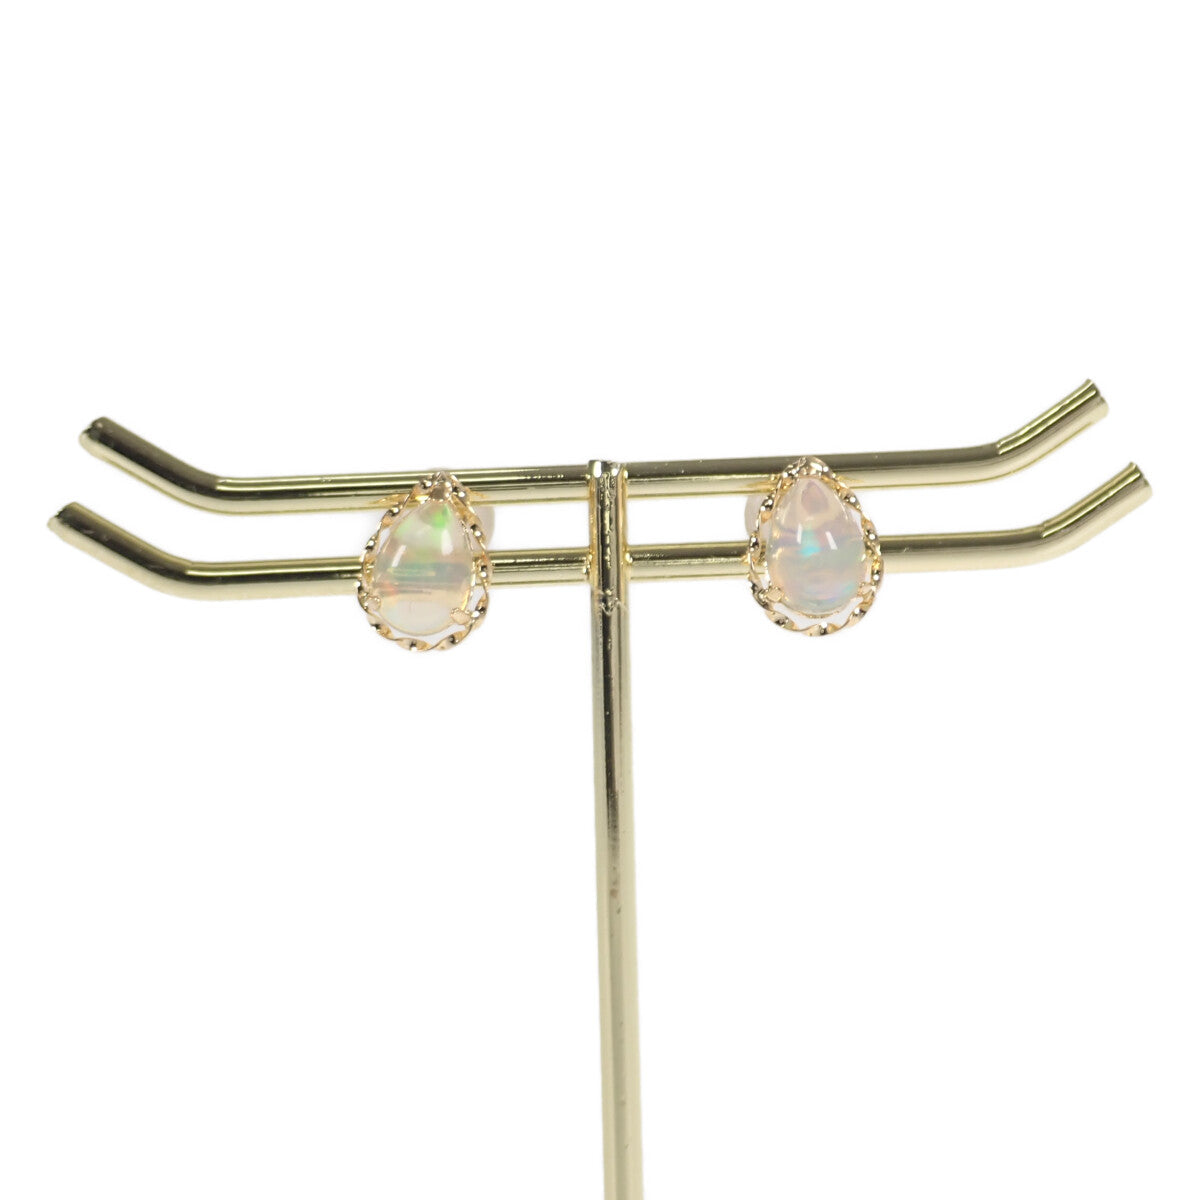 Women's 0.45ct Water Opal Design Earrings in K18 Yellow Gold, Gold, Never Used, Pre-owned